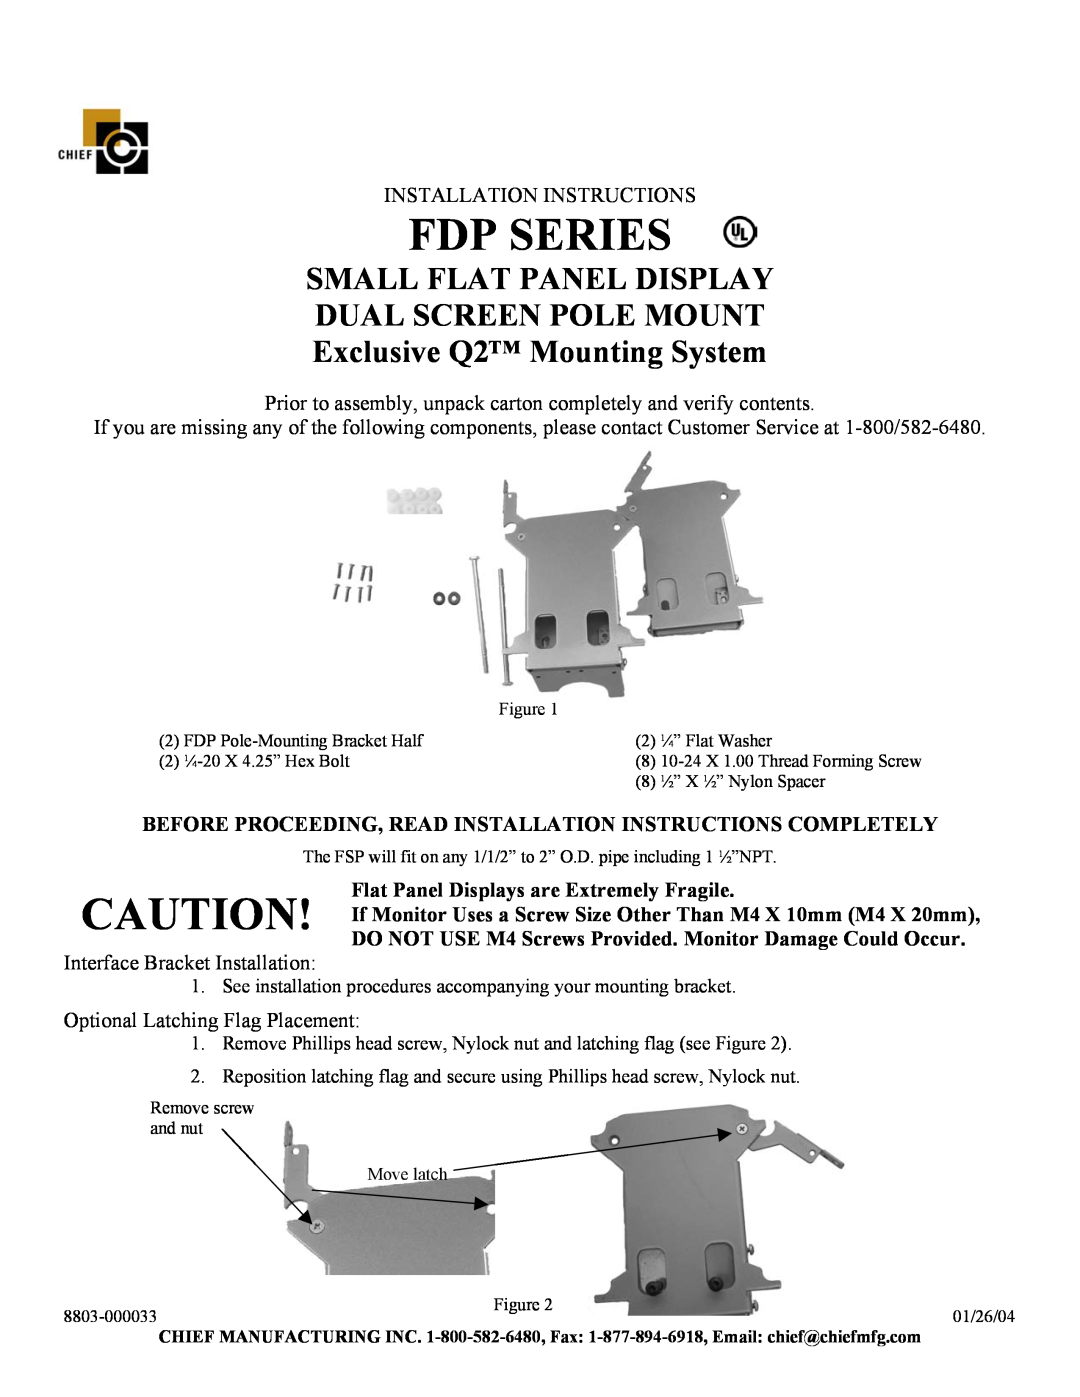 Chief Manufacturing FDP Series installation instructions Fdp Series, Small Flat Panel Display Dual Screen Pole Mount 